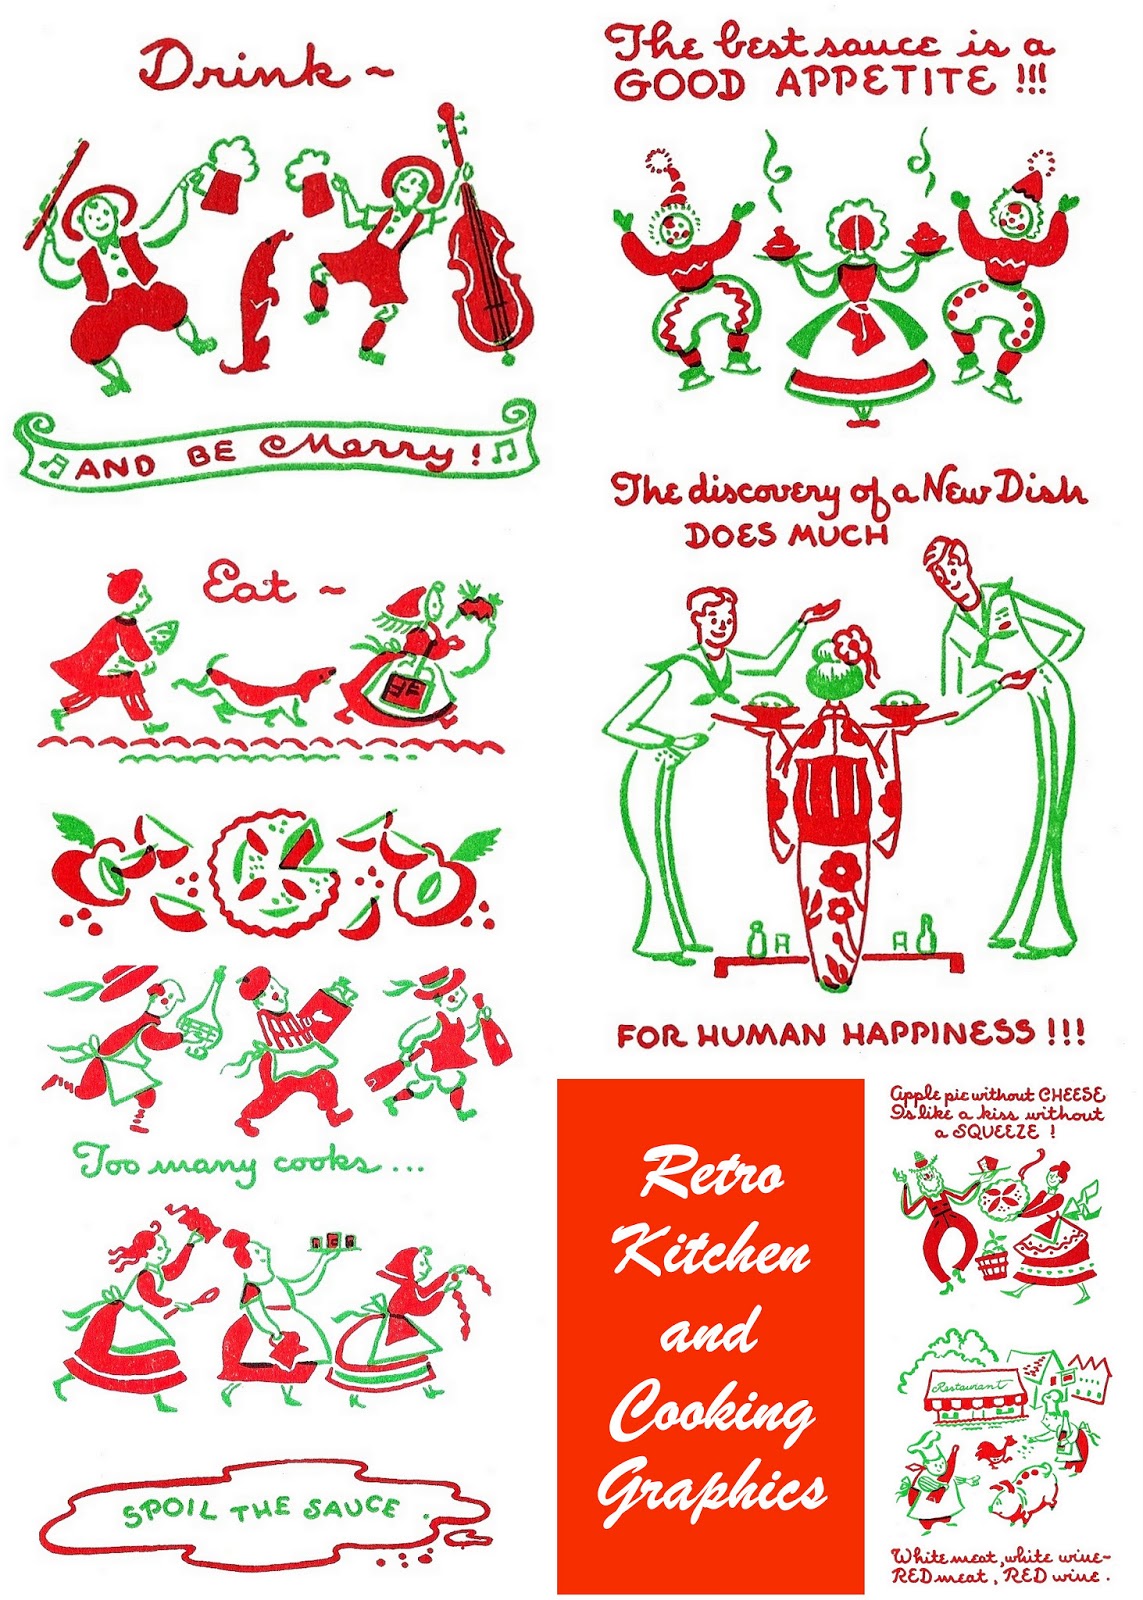     Rook No  17   Free Vintage Clipart  Retro Kitchen   Cooking Graphics